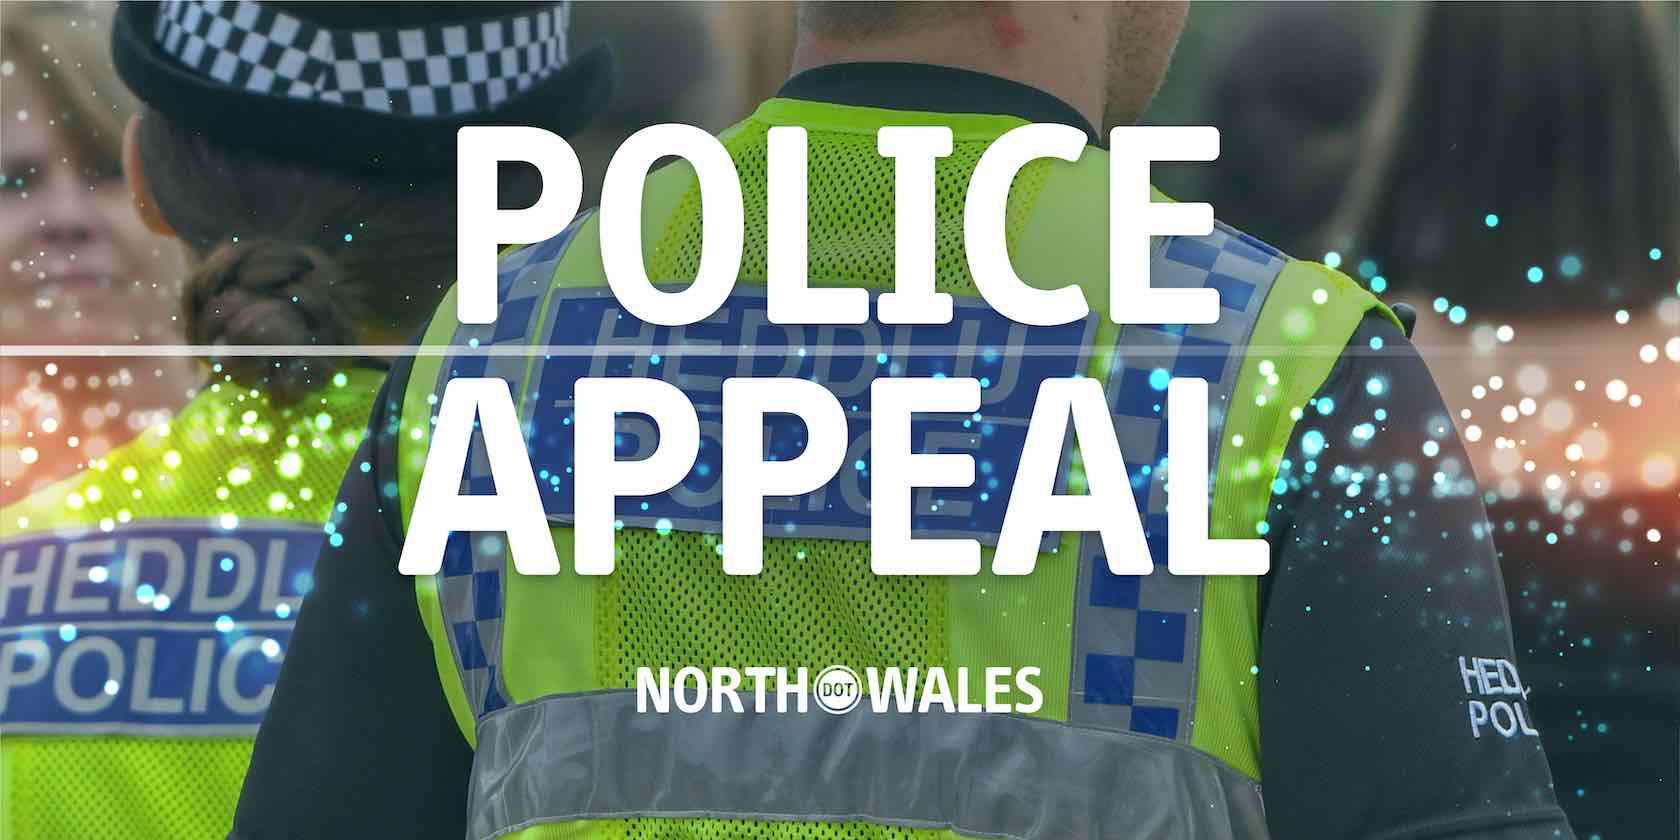 23 year old pedestrian killed after collision in St Asaph